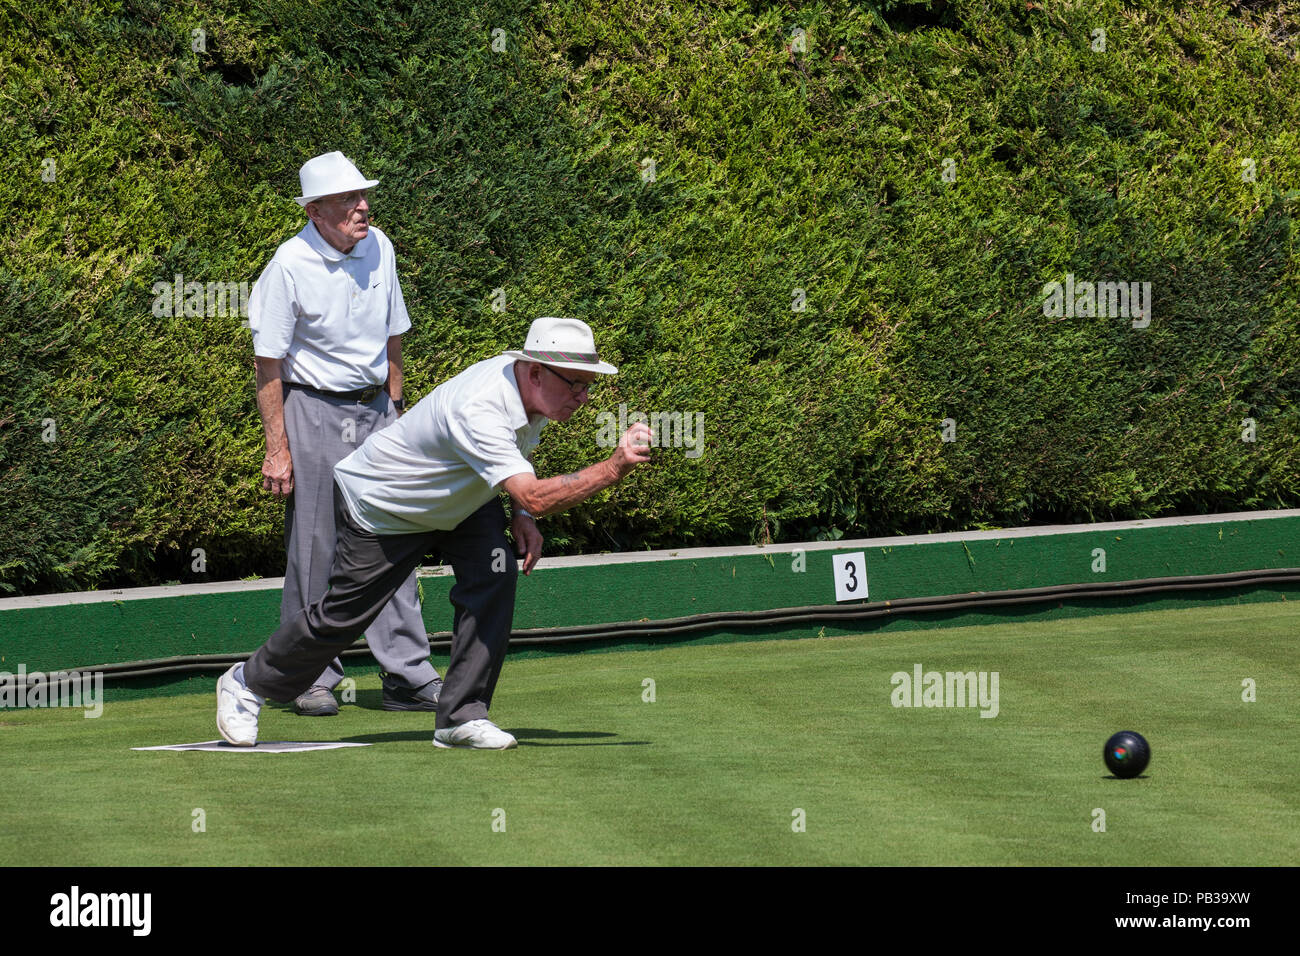 Windsor, UK. 26th July, 2018. Two men enjoy a game of bowls on a still pristine lawn at the Windsor and Eton Bowling Club on a very hot summer's day. Temperatures are expected to reach 36C today in the south-east. Even if imposed, sports facilities such as bowling clubs are often exempt from water restrictions during a drought. Credit: Mark Kerrison/Alamy Live News Stock Photo